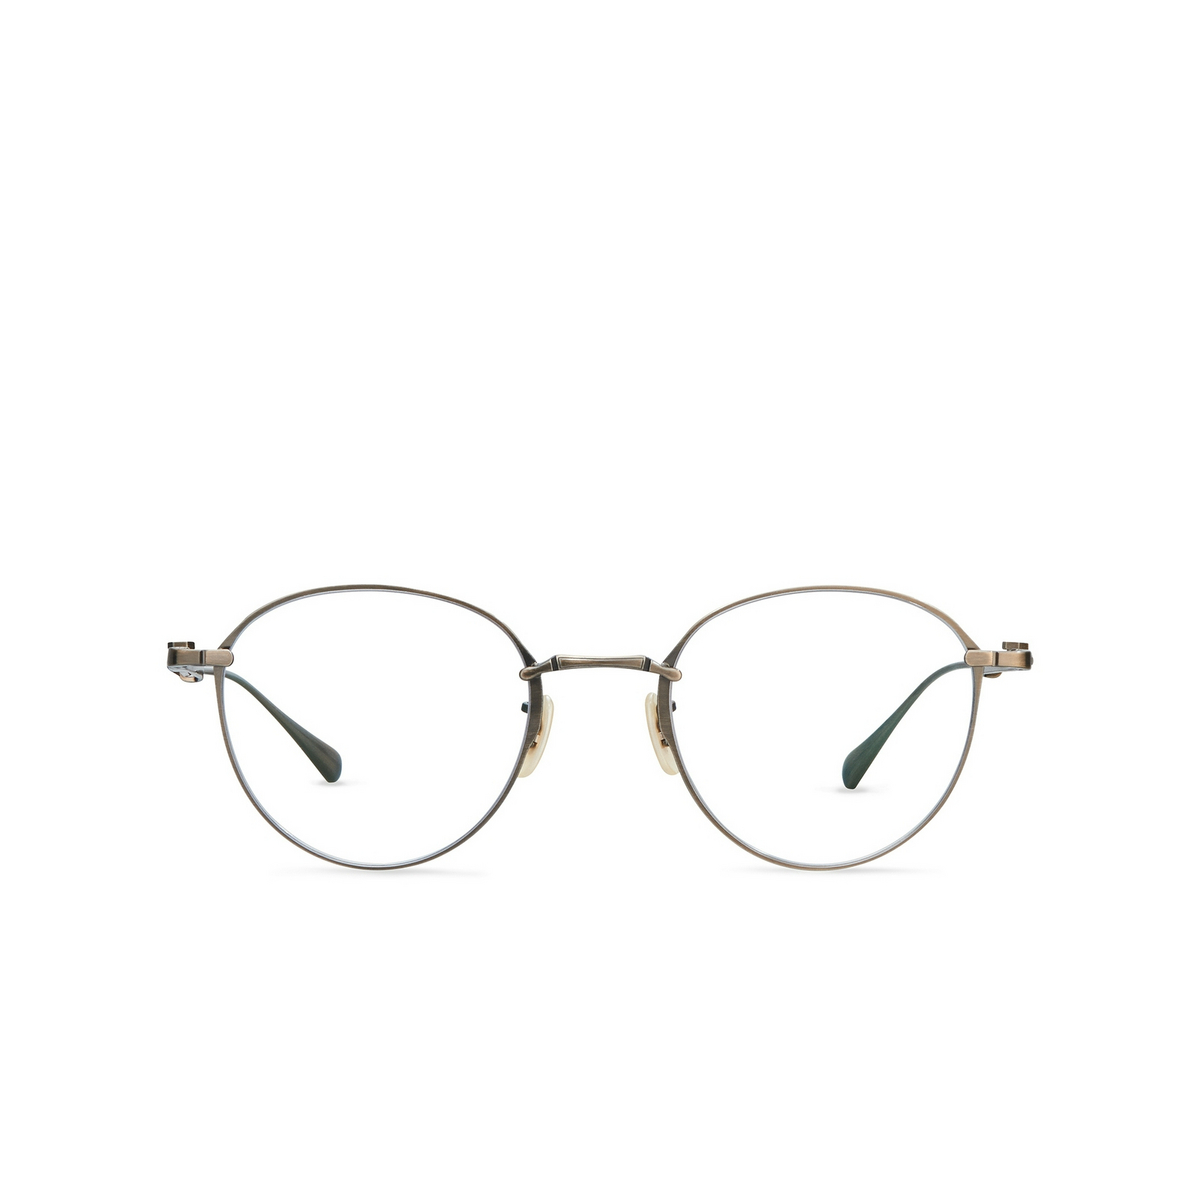 Mr. Leight MULHOLLAND CL Eyeglasses ATG-BW Antique Gold-Beachwood - front view